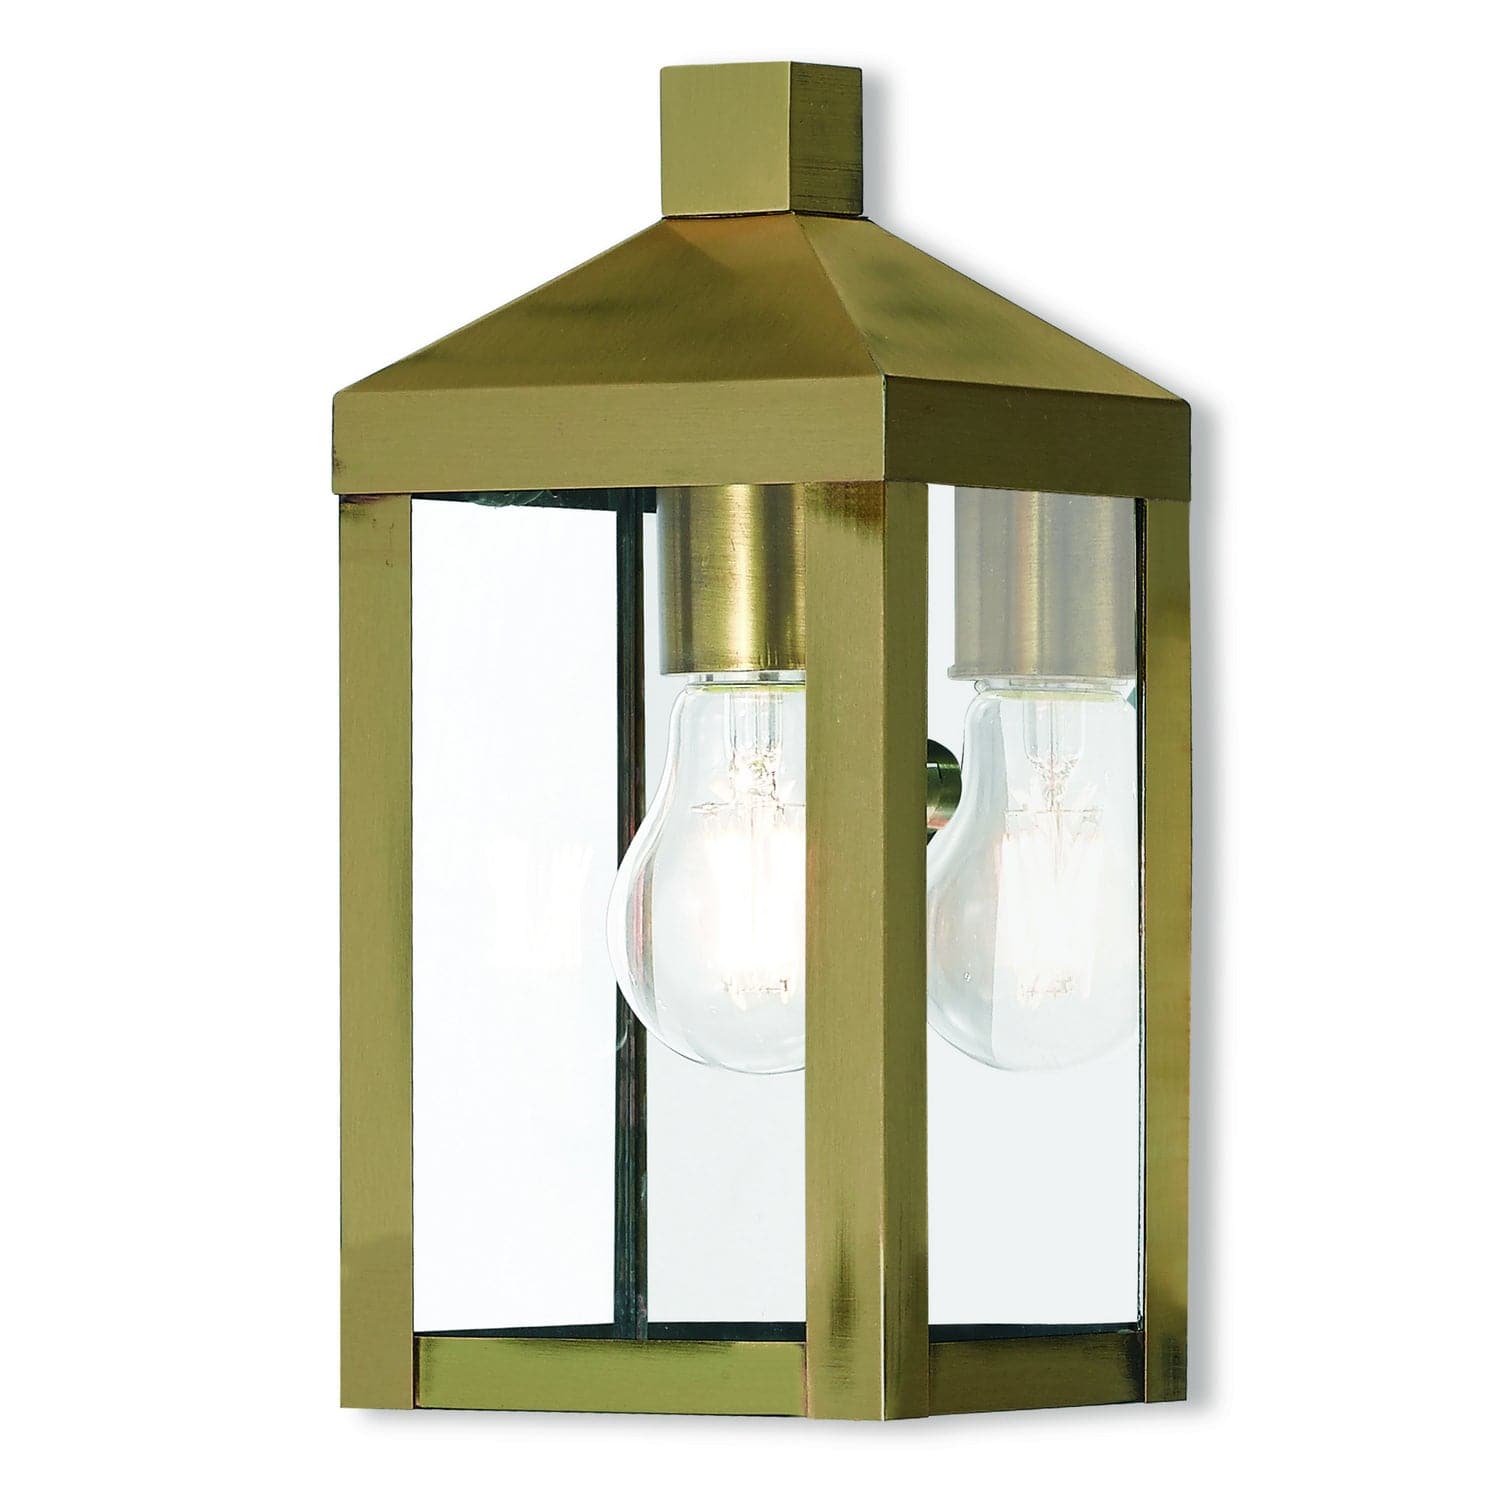 Livex Lighting - 20581-01 - One Light Outdoor Wall Lantern - Nyack - Antique Brass w/ Polished Chrome Stainless Steel